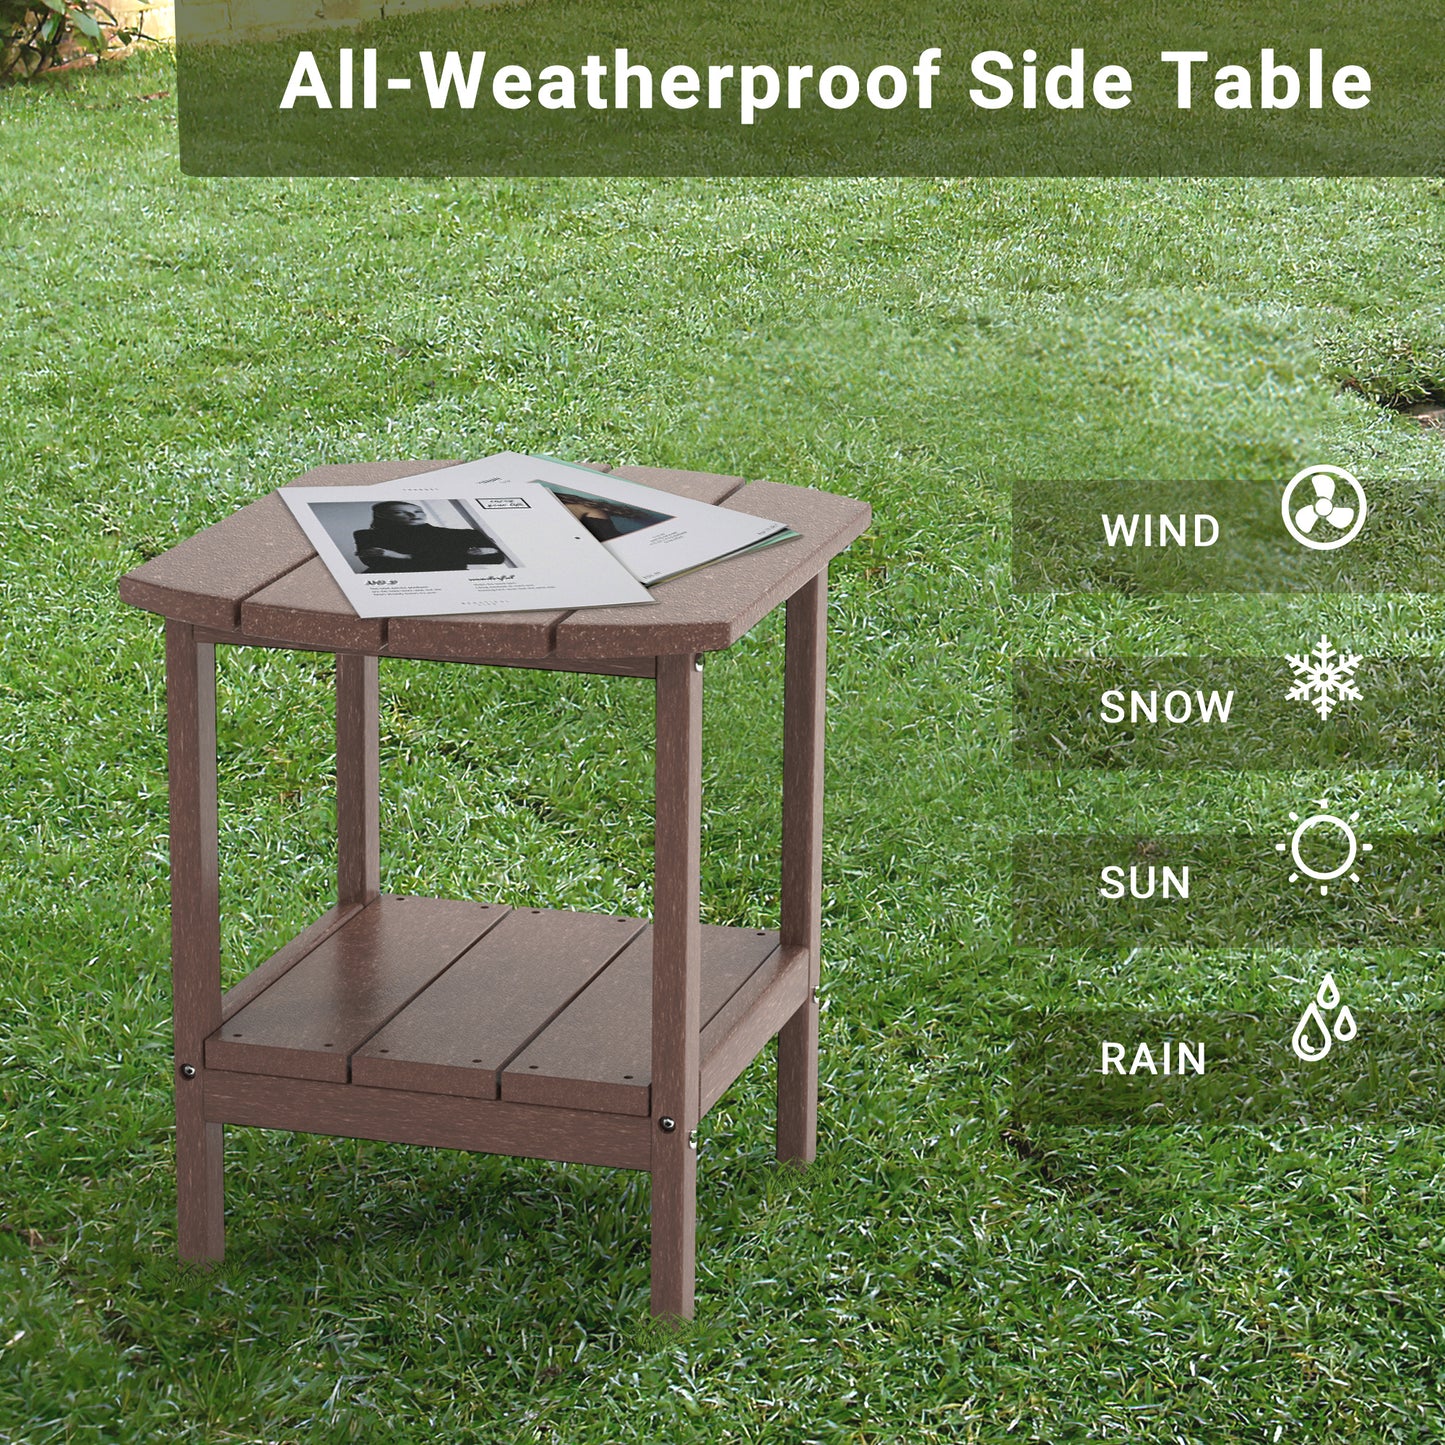 Outdoor Side Table for Adirondack Chairs;  All-Weather Resistant Humidity-Proof Waterproof Stain-Proof Accent Tables;  Backyard Deck Porch Beach Pool Yard Outside Lawn Patio Rocker Glider End Table